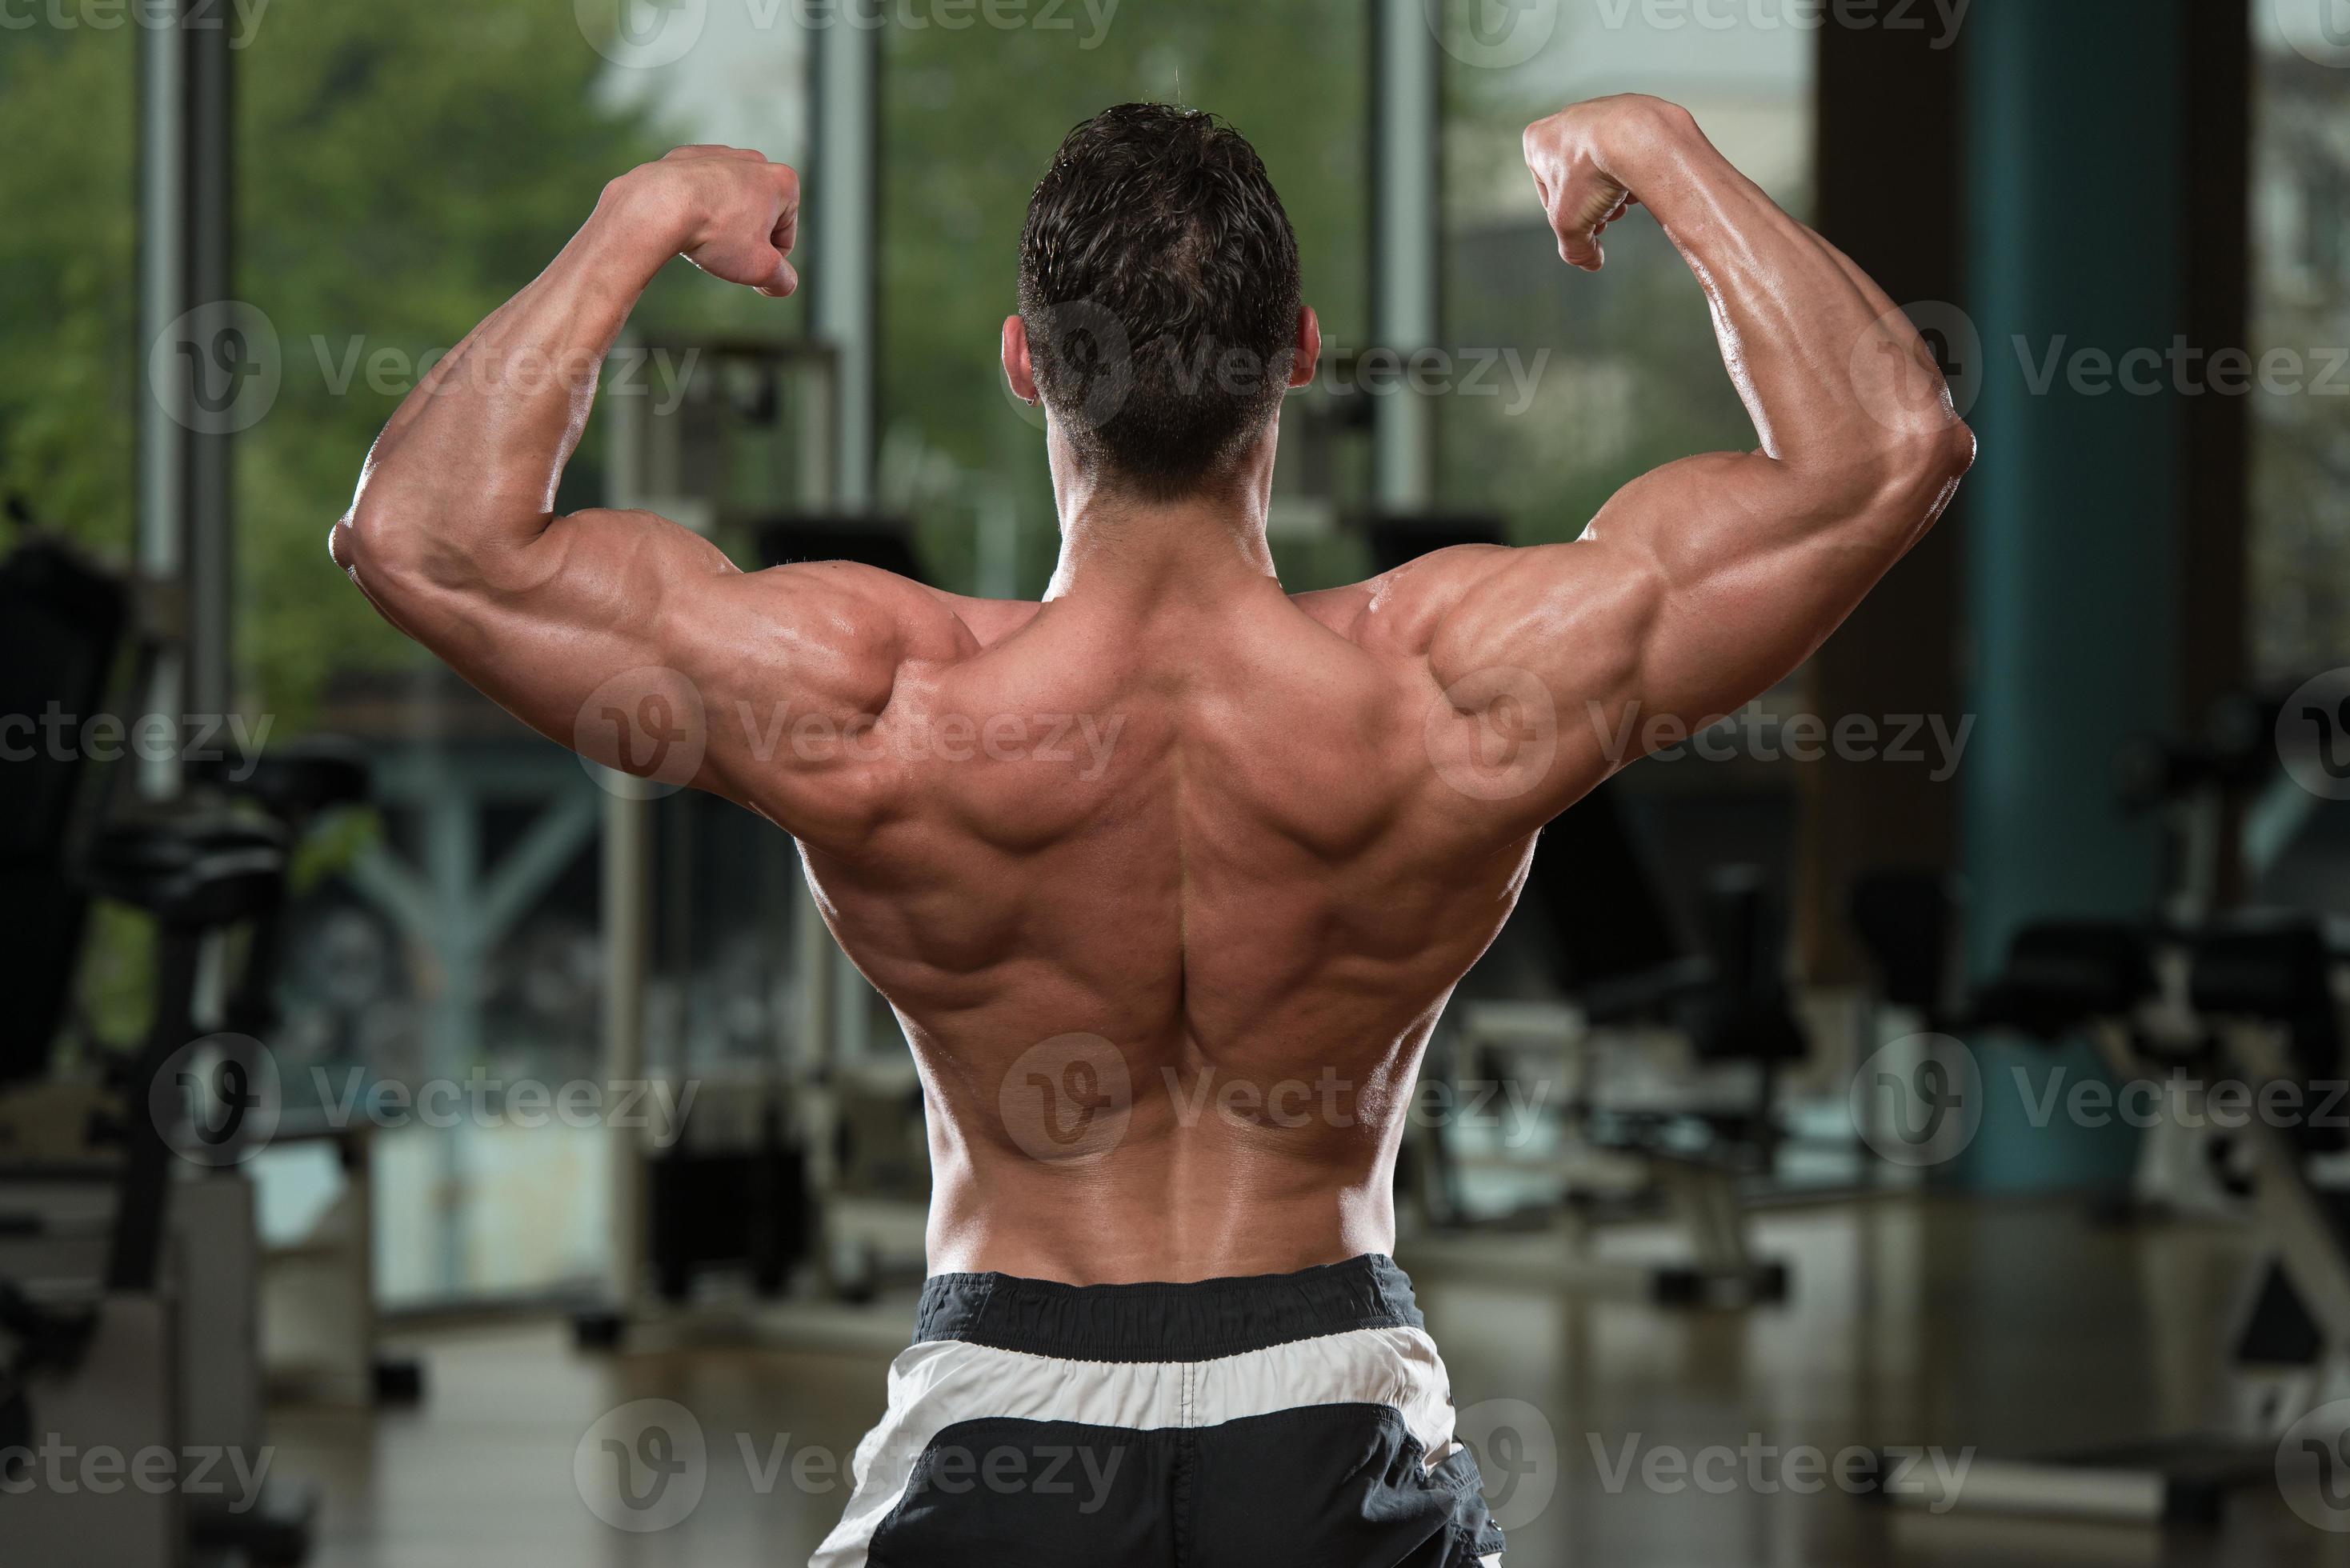 Bodybuilder Performing Rear Double Biceps Pose 783198 Stock Photo At